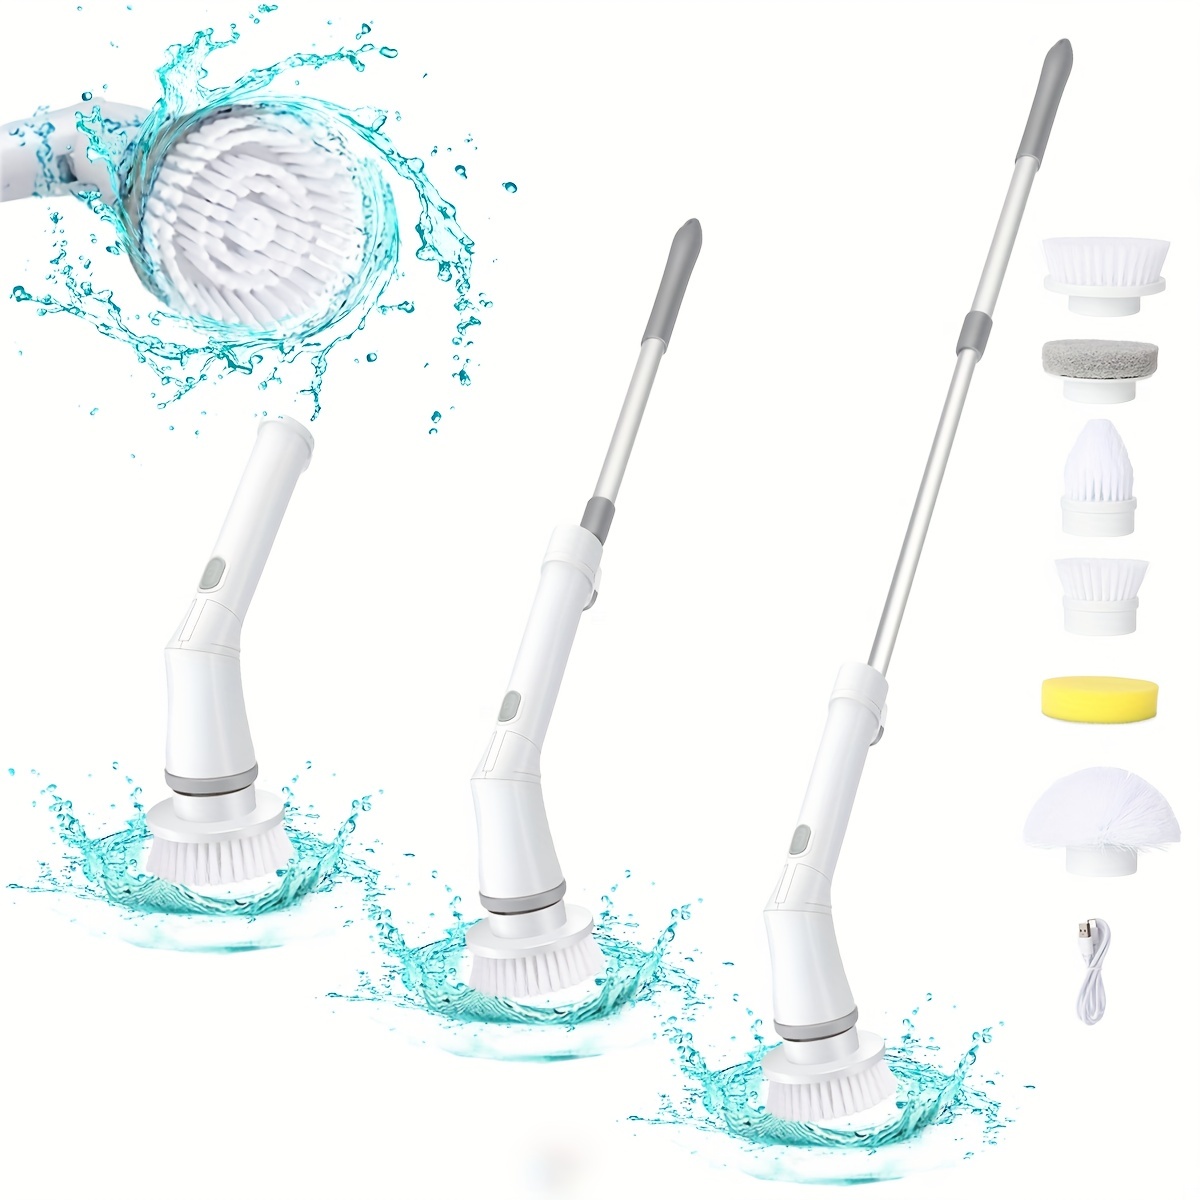 Electric Spin Scrubber, E Spin Power Scrubber Cleaning Brush for